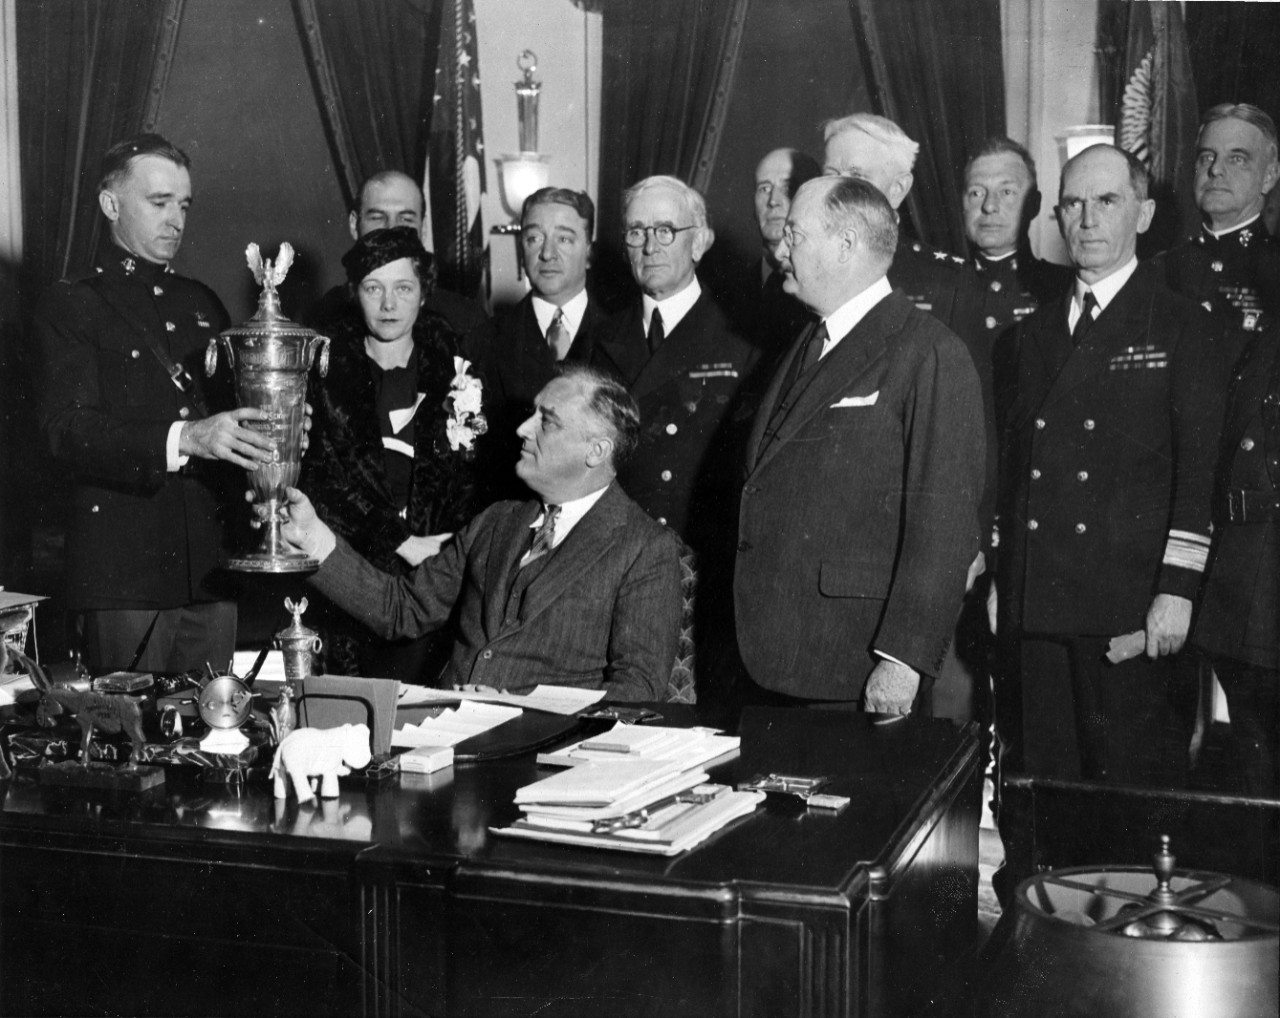 President Franklin D. Roosevelt presents the Herbert Schiff Trophy for naval aviation safety to a Marine aviator, at a ceremony in the White House. At center, standing, is Chief of Naval Operations Admiral William H. Standley. Also seen are Rear Admiral Ernest J. King (standing, center rear) and Rear Admiral William Leahy (at right).